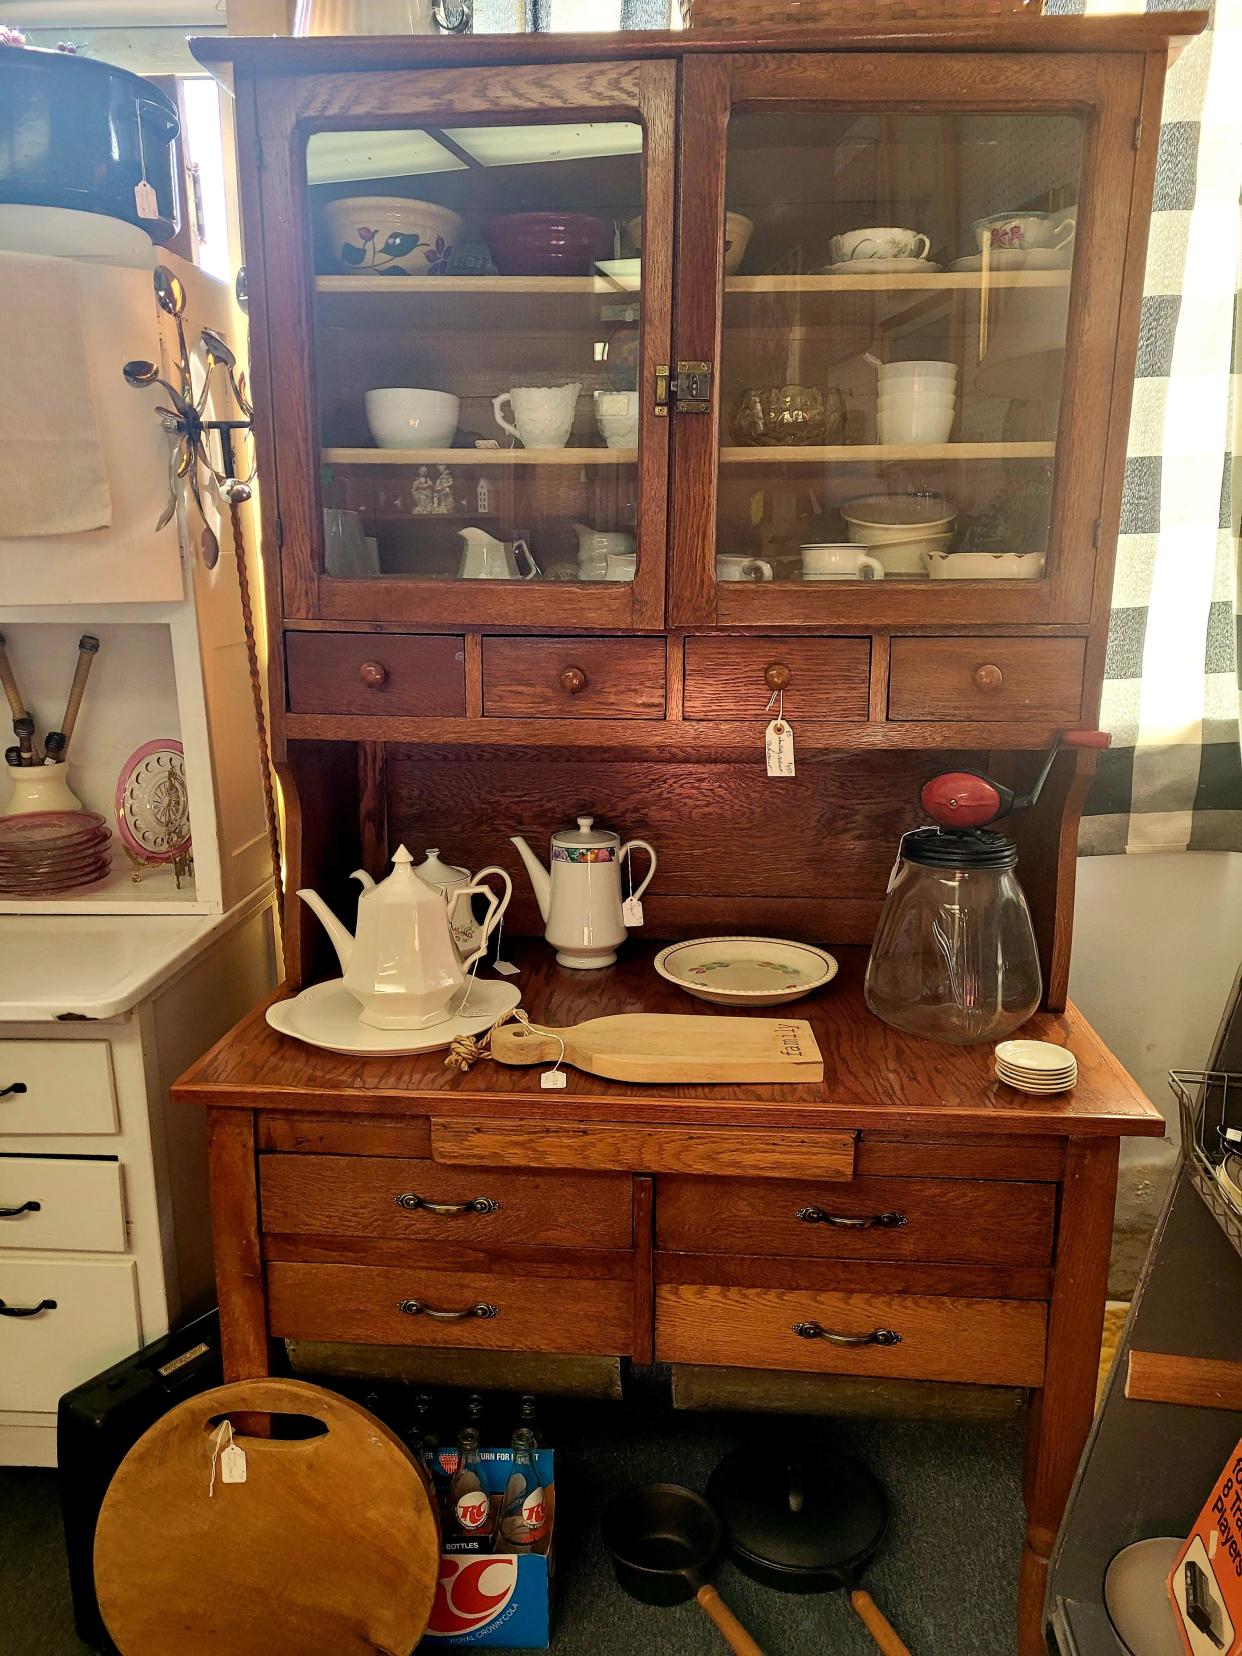 A baker's cabinet is part of the inventory that's 25% off at The Cottage Door Antiques & Gifts.